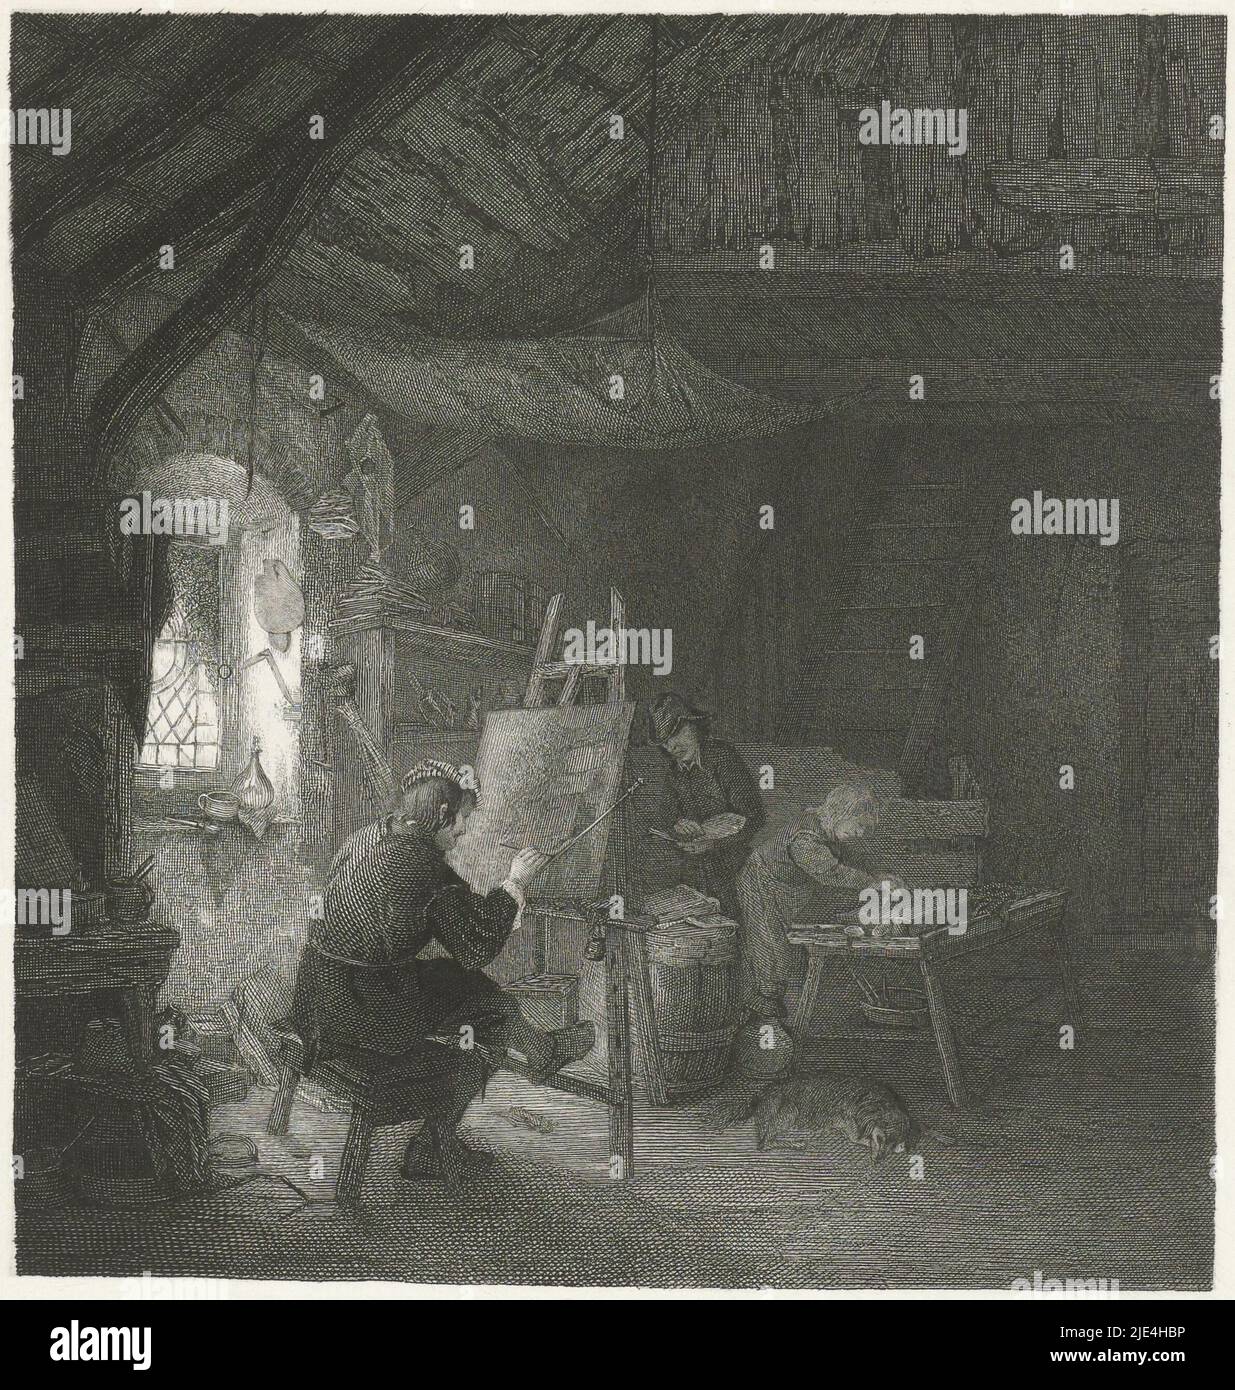 Painter in his studio, Leopold Löwenstam, after Adriaen van Ostade, 1852 - 1898, A painter at work in his studio. He is seated behind an easel near the window. At a table under a staircase, two assistants or apprentices prepare paints., print maker: Leopold Löwenstam, after: Adriaen van Ostade, 1852 - 1898, paper, engraving, etching, h 315 mm × w 275 mm Stock Photo